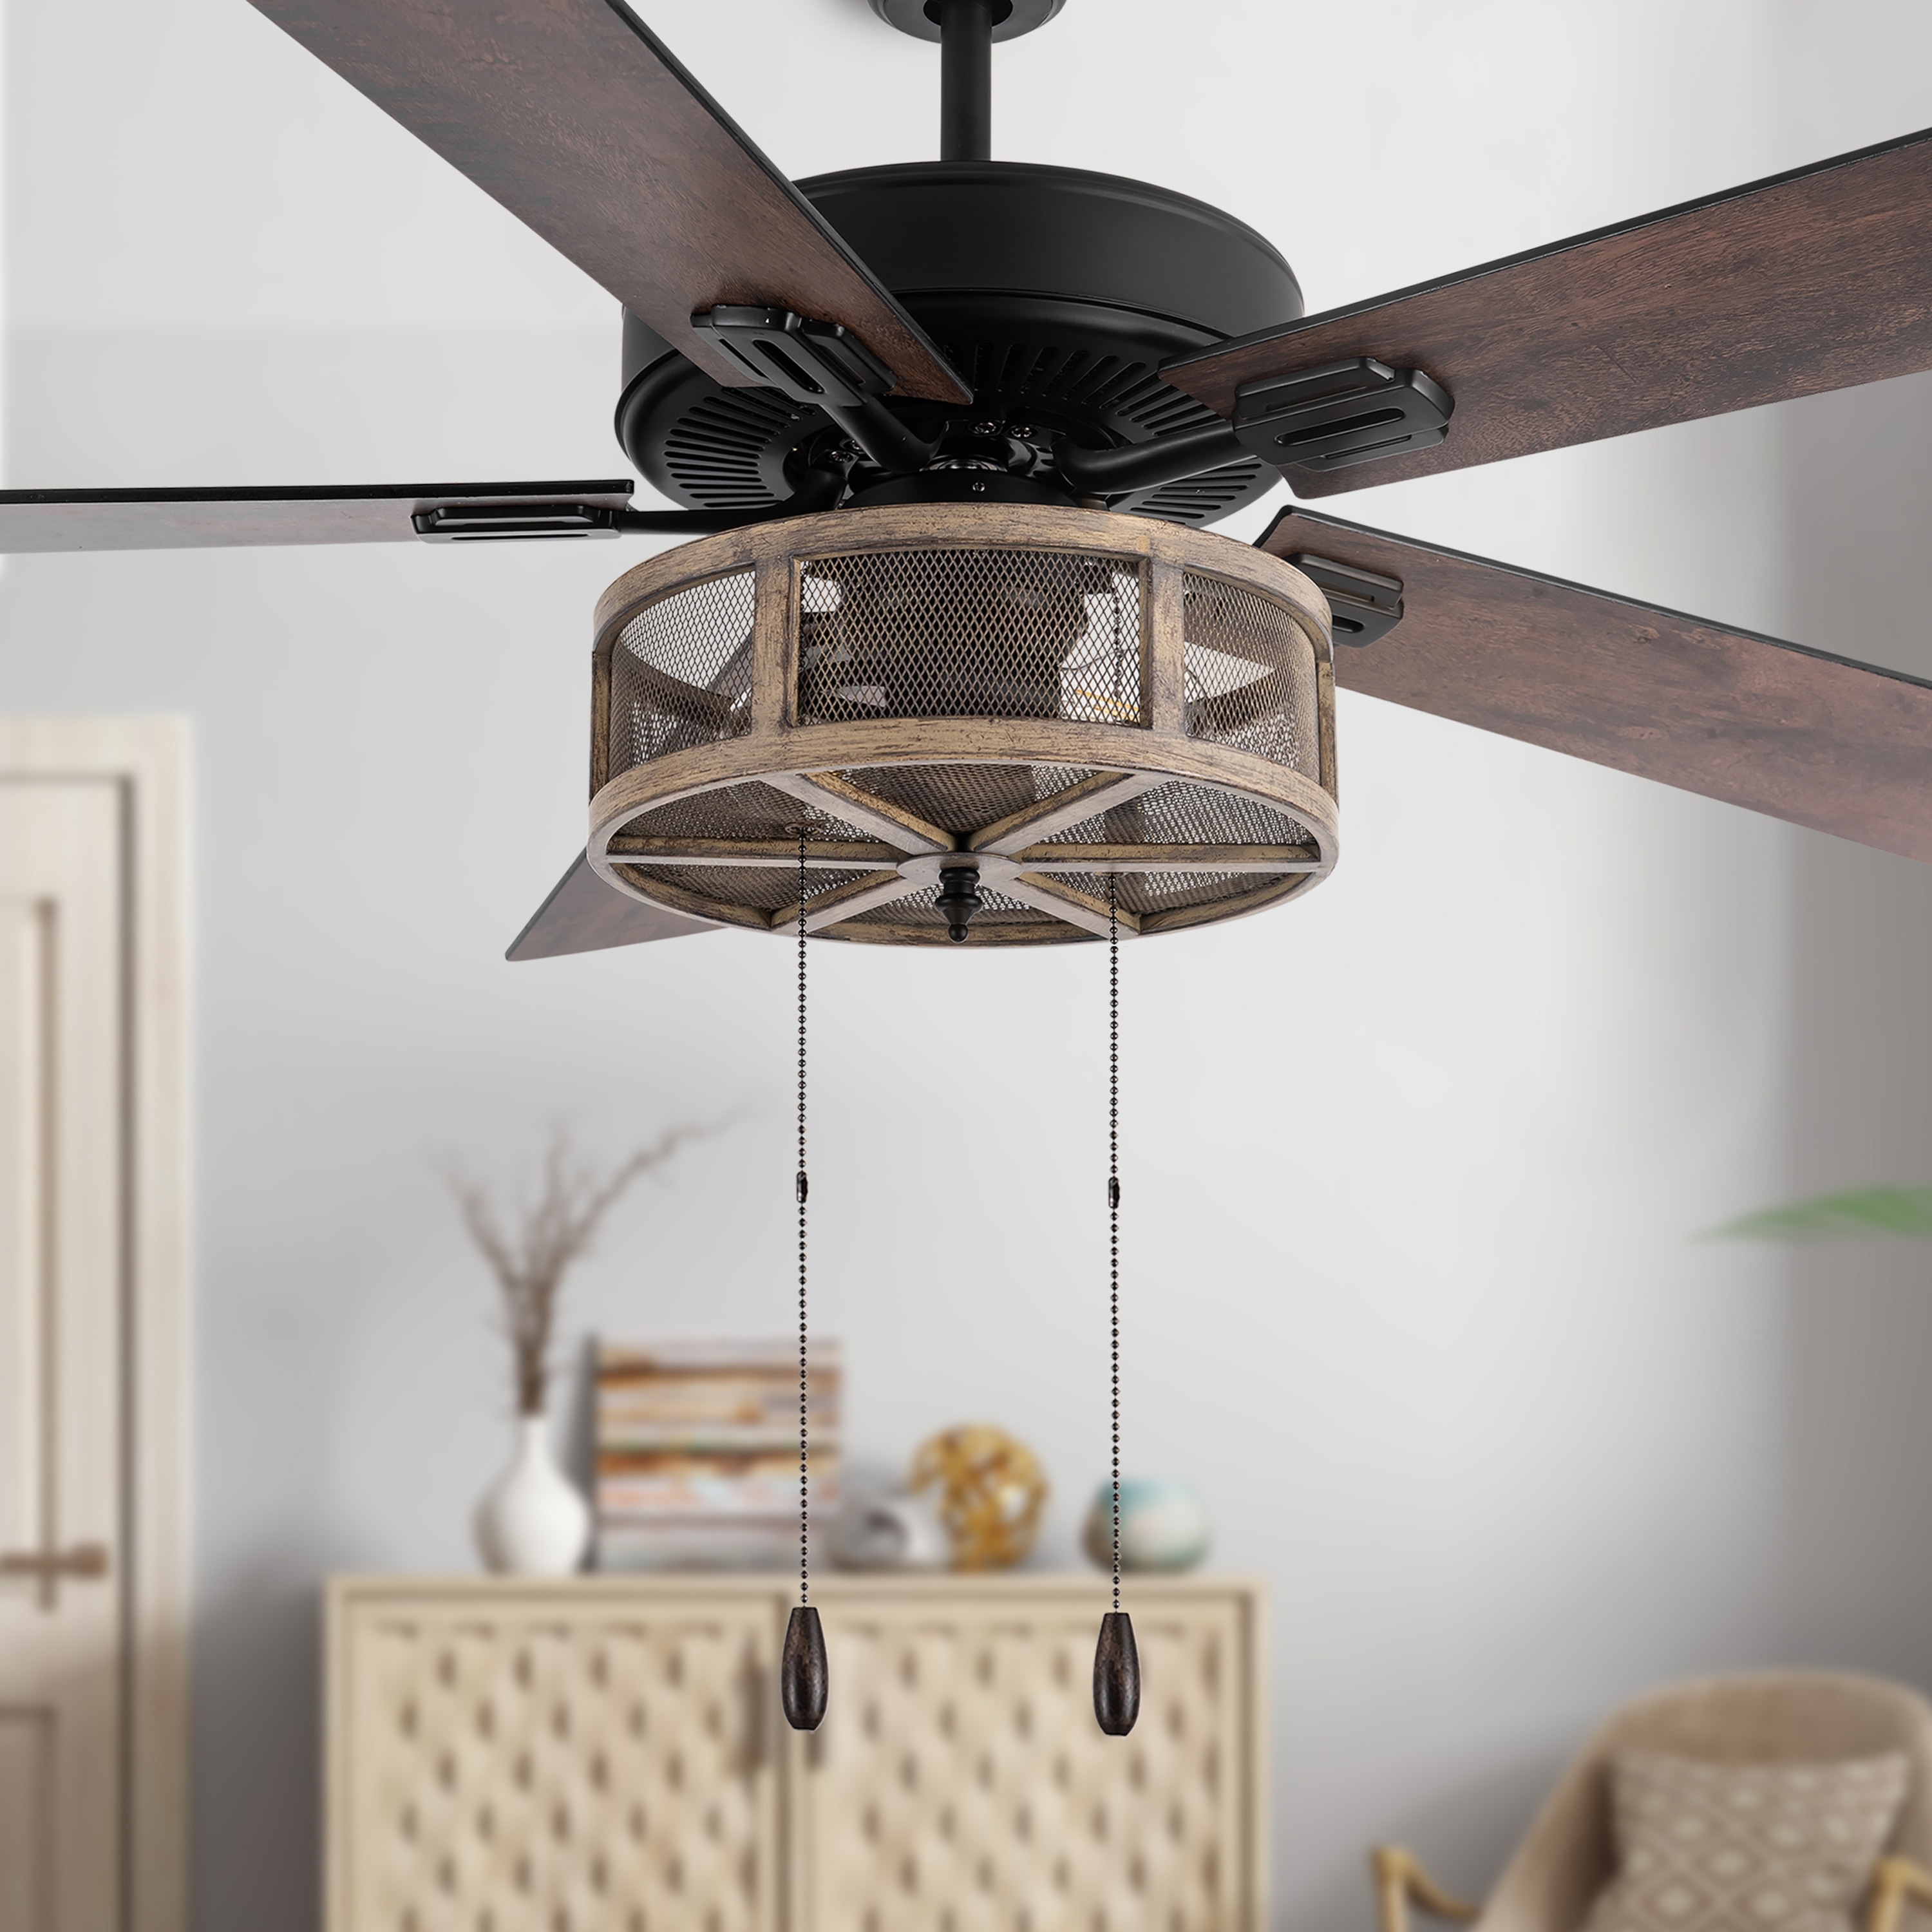 Indoor LED Ceiling Fan 52" Rustic Barnwood Classic Blades Industrial Cage New 